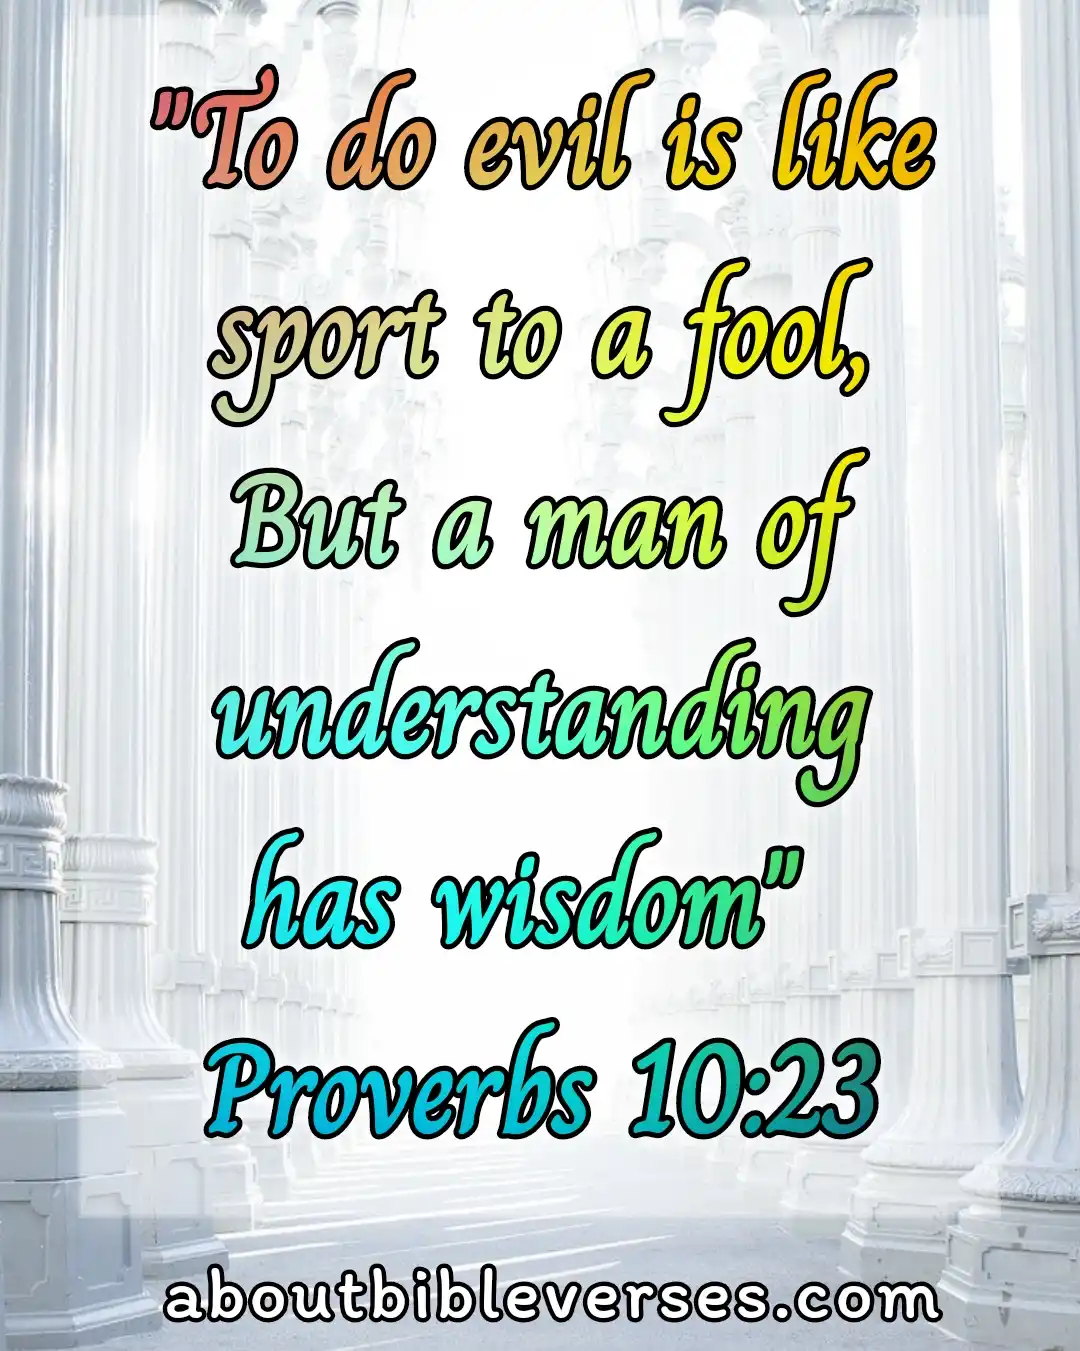 Bible Verses About Do Not Argue With A Fool (Proverbs 10:23)